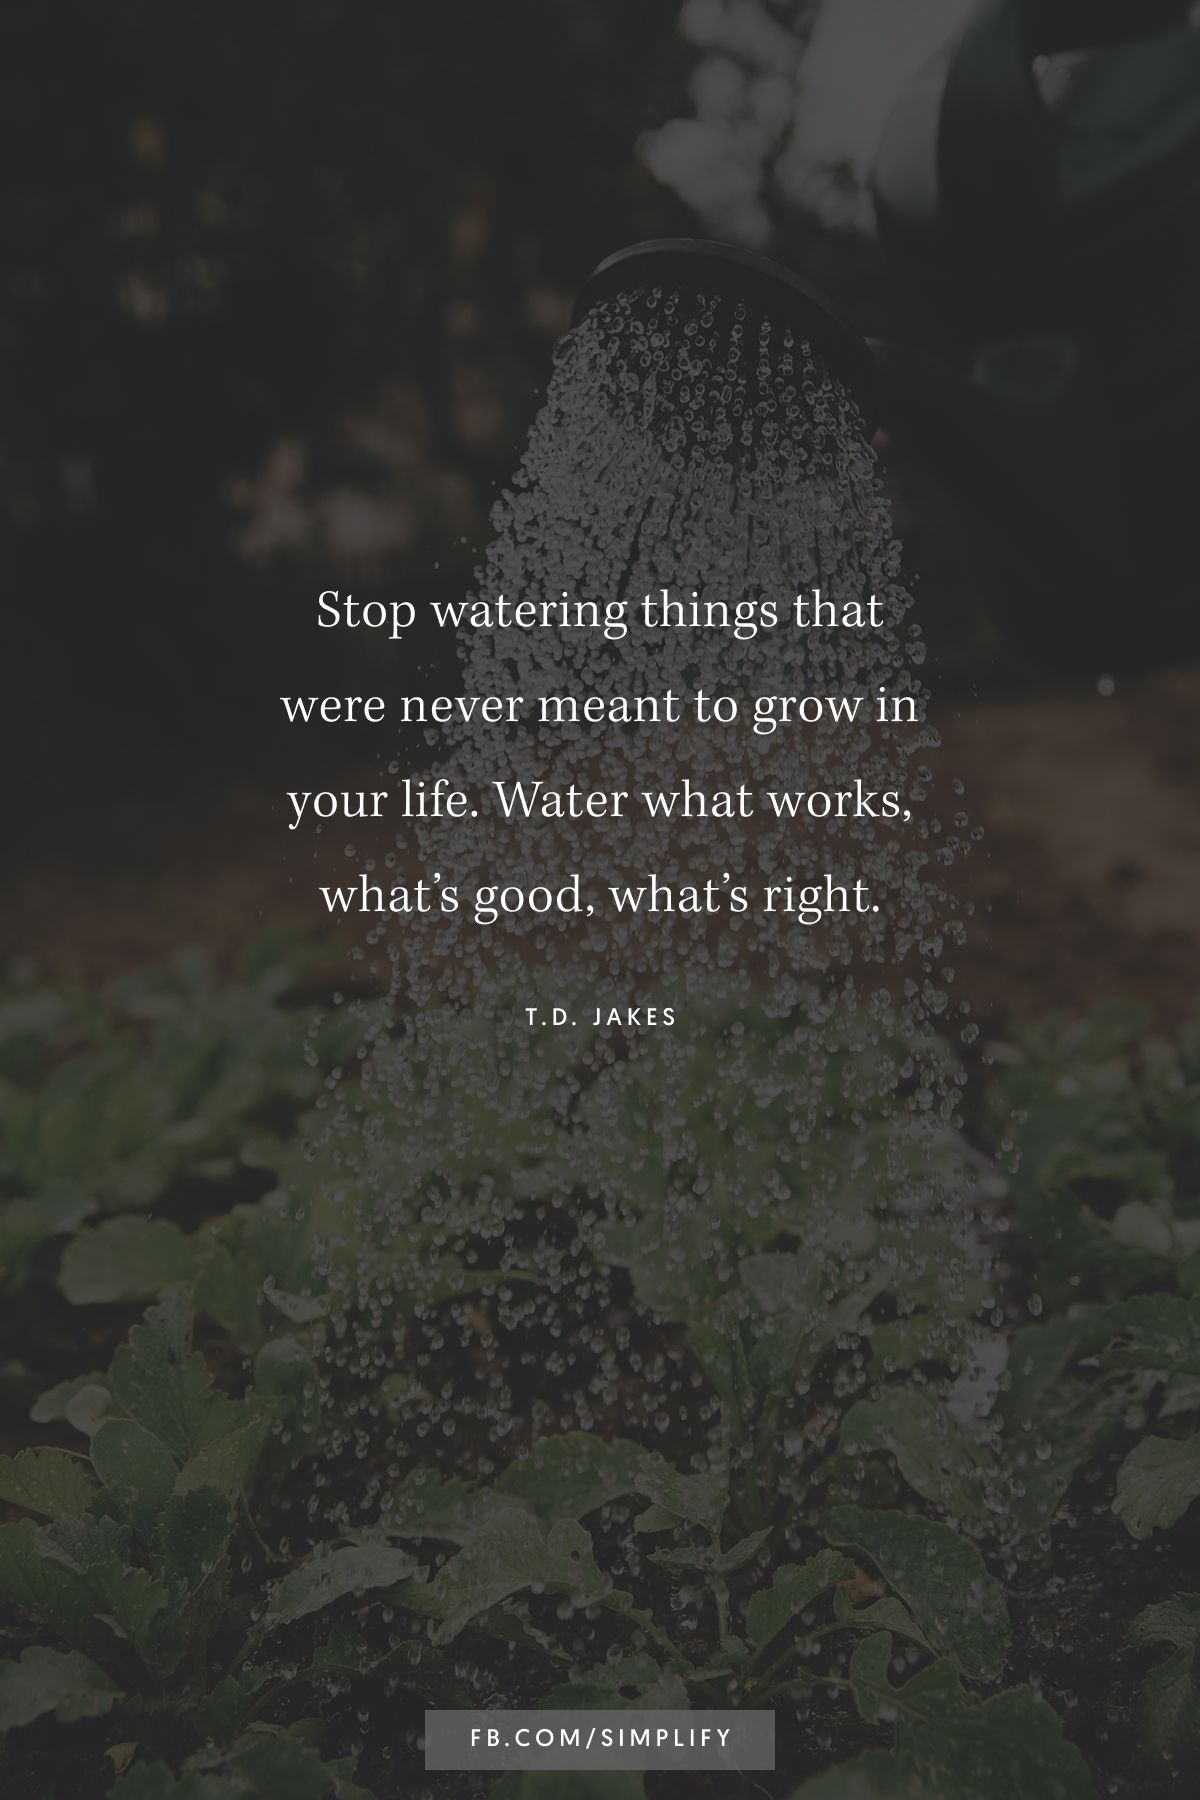 stop watering things that were never meant to grow in your life, water what works, what's good, what's right